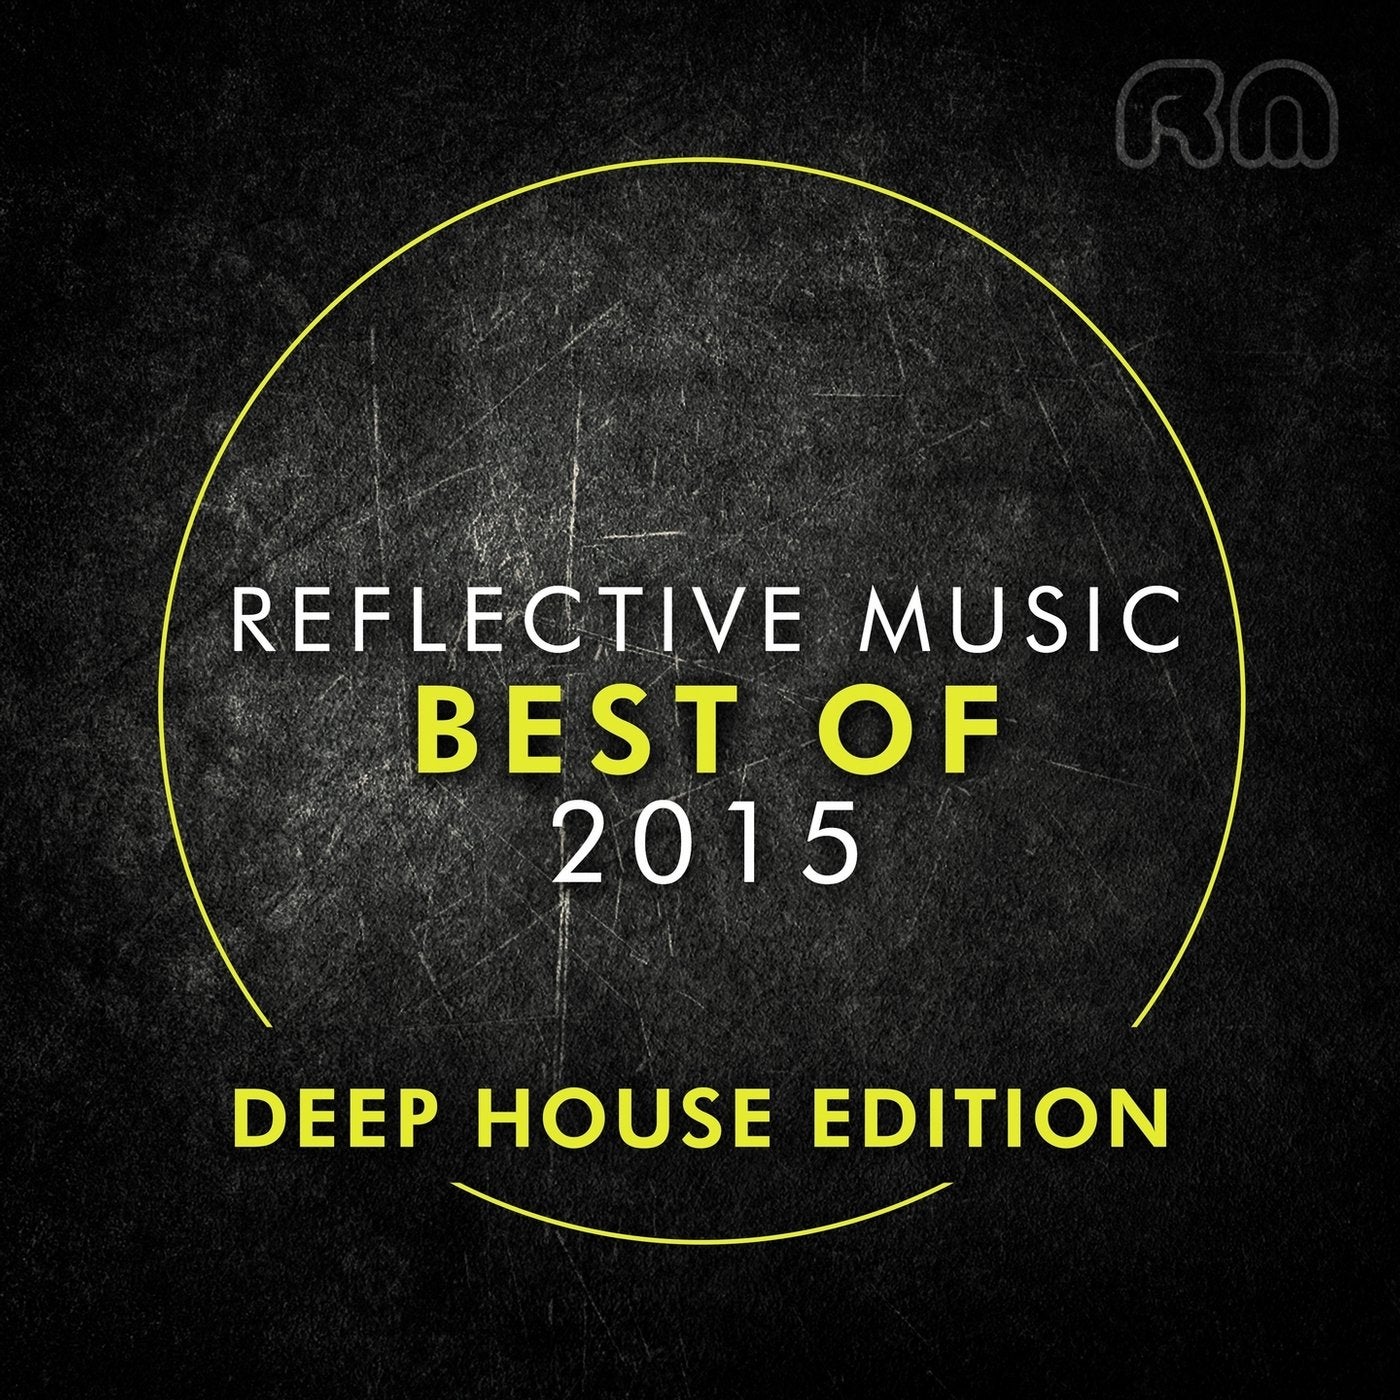 Best of 2015 - Deep House Edition